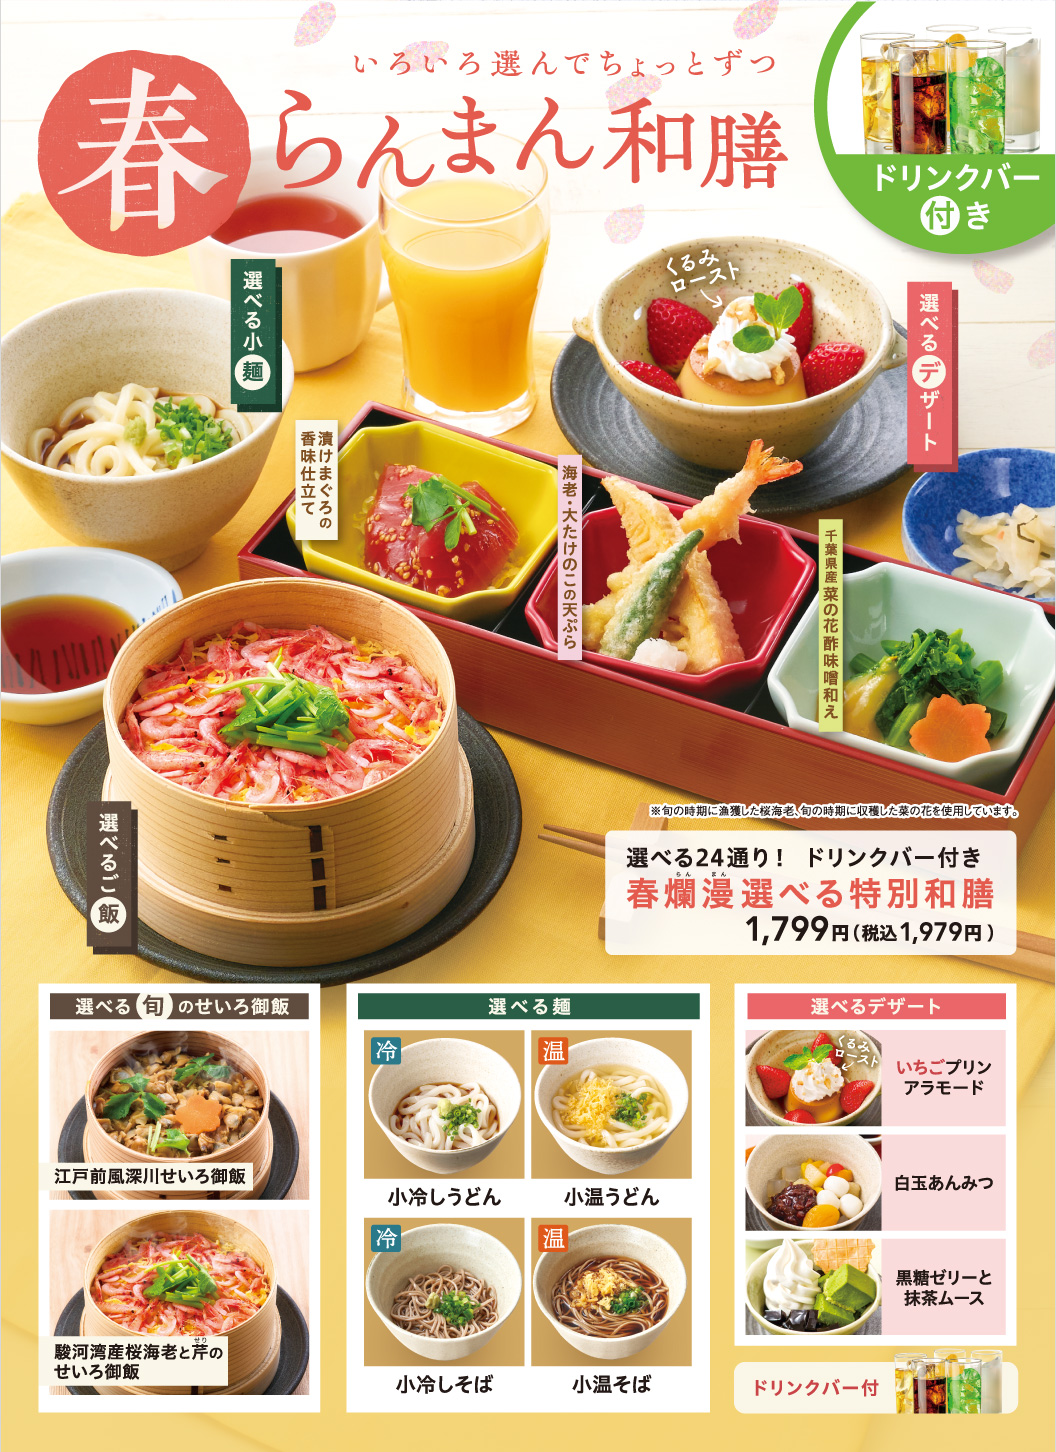 Special Japanese meals to choose from during spring